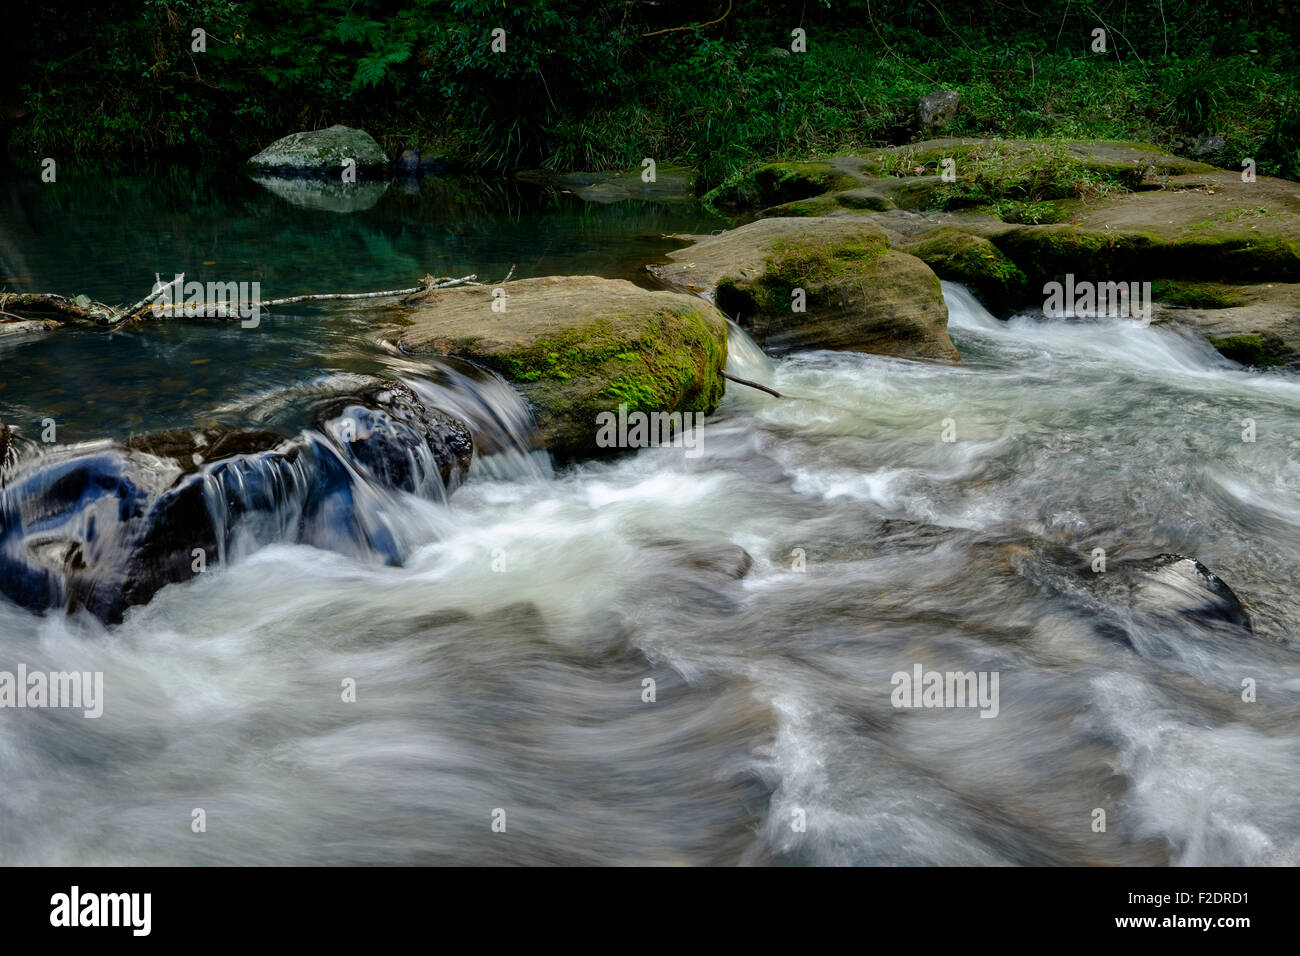 Sul Fiume Nerang a Lione Crossing, Numinbah Valley Foto Stock